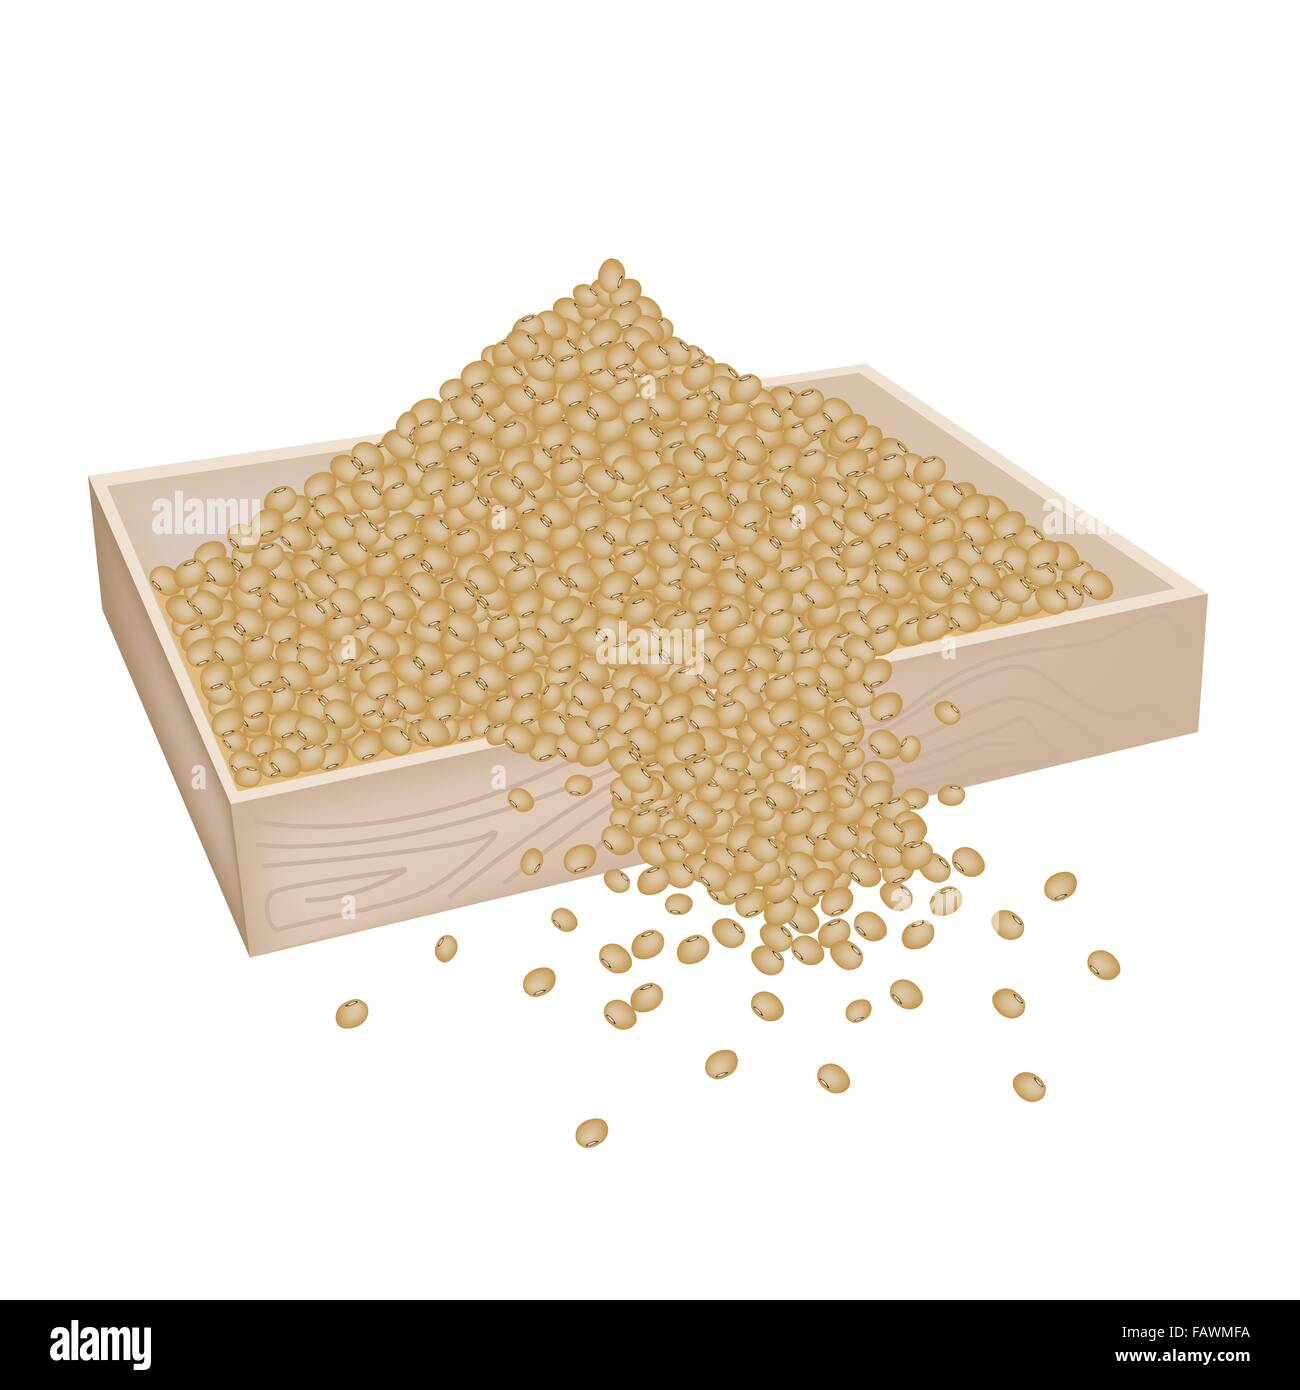 An Illustration Heap Of Soy Beans in Wooden Box Isolated on White Background Stock Photo